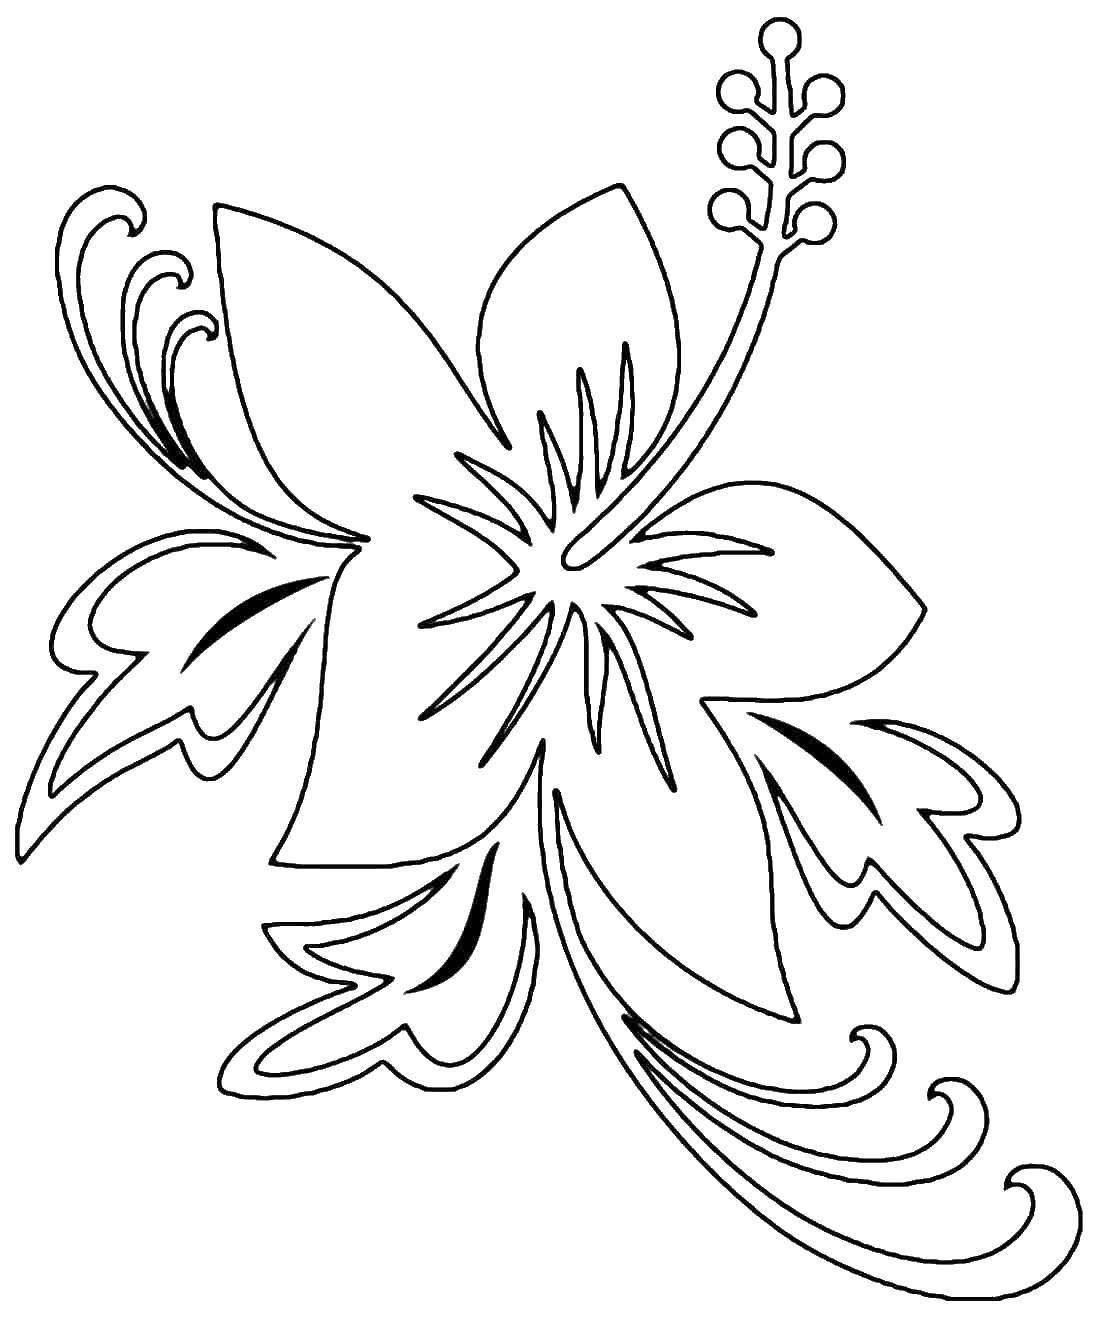 Coloring Lily. Category flowers. Tags:  flowers, plants, buds, petals, Lily.